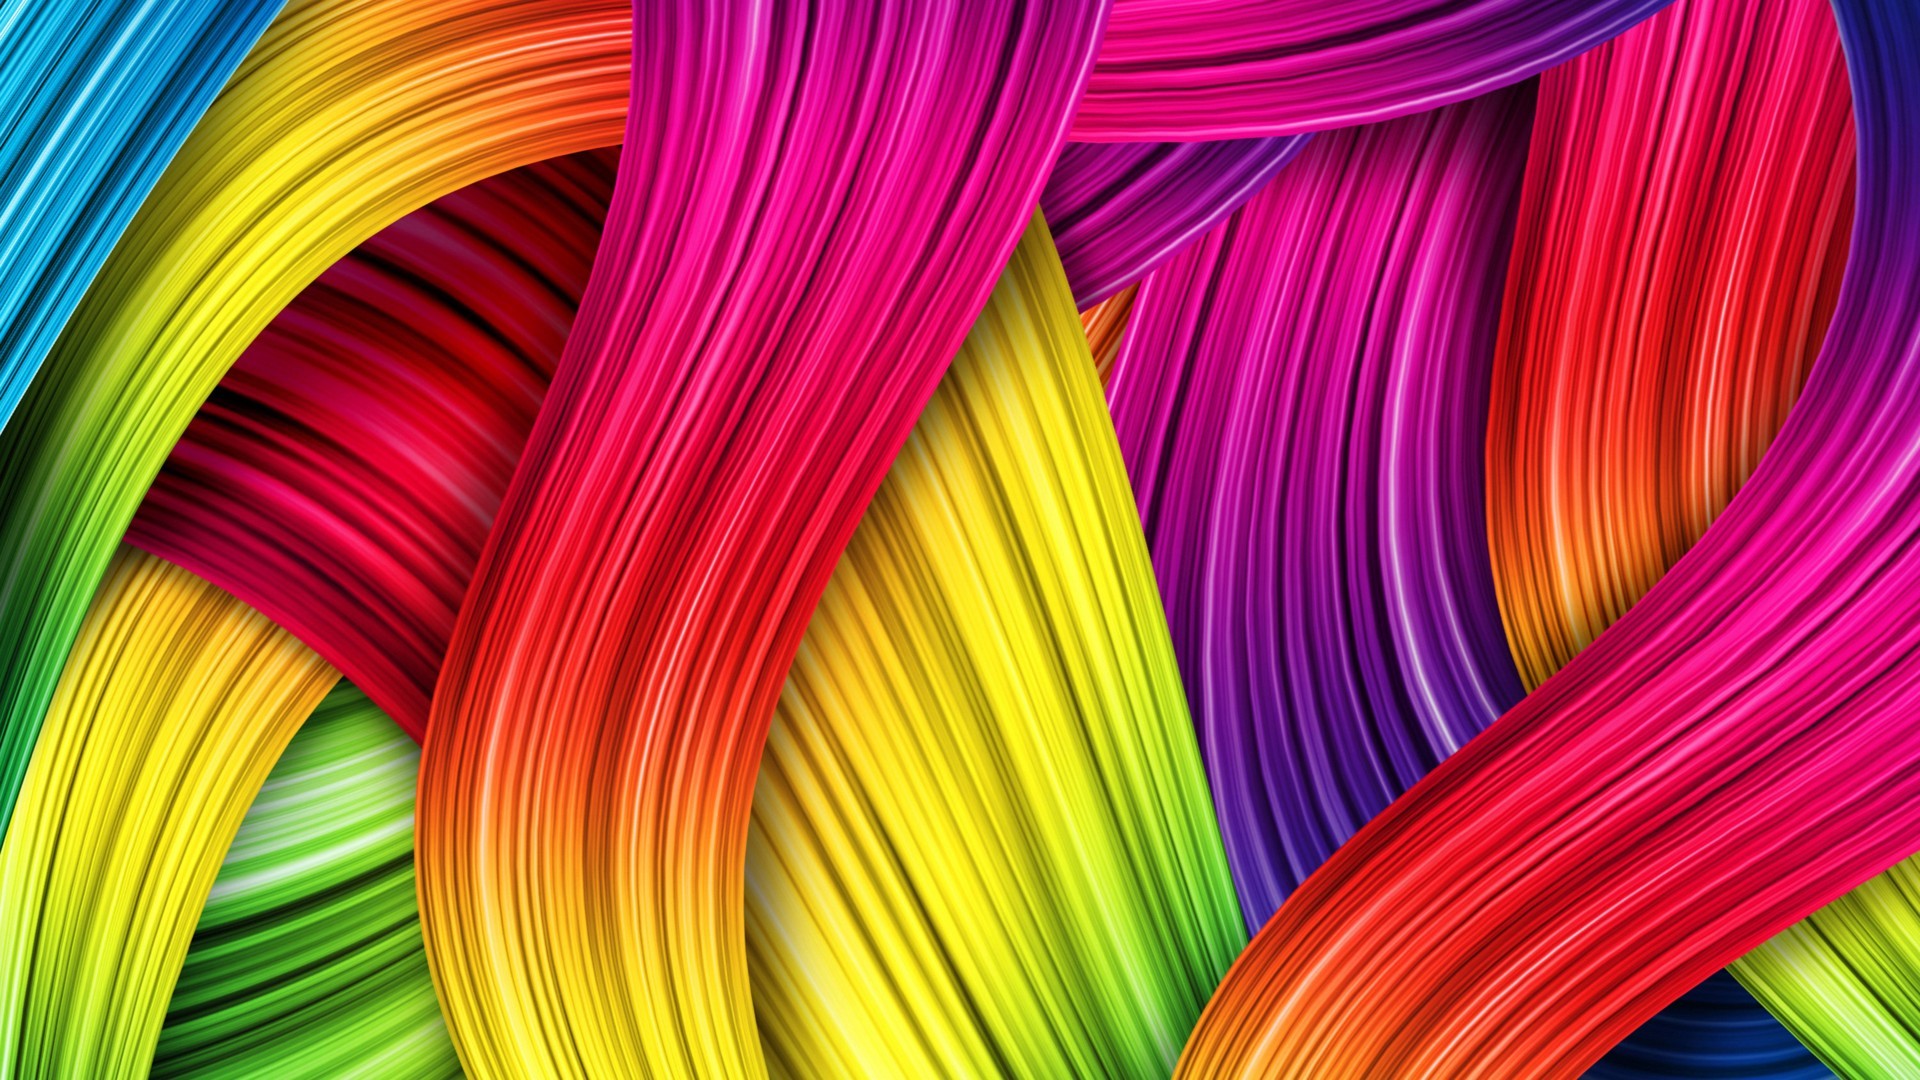 1920x1080 ... 8 Colors Of The Rainbow - wallpaper.